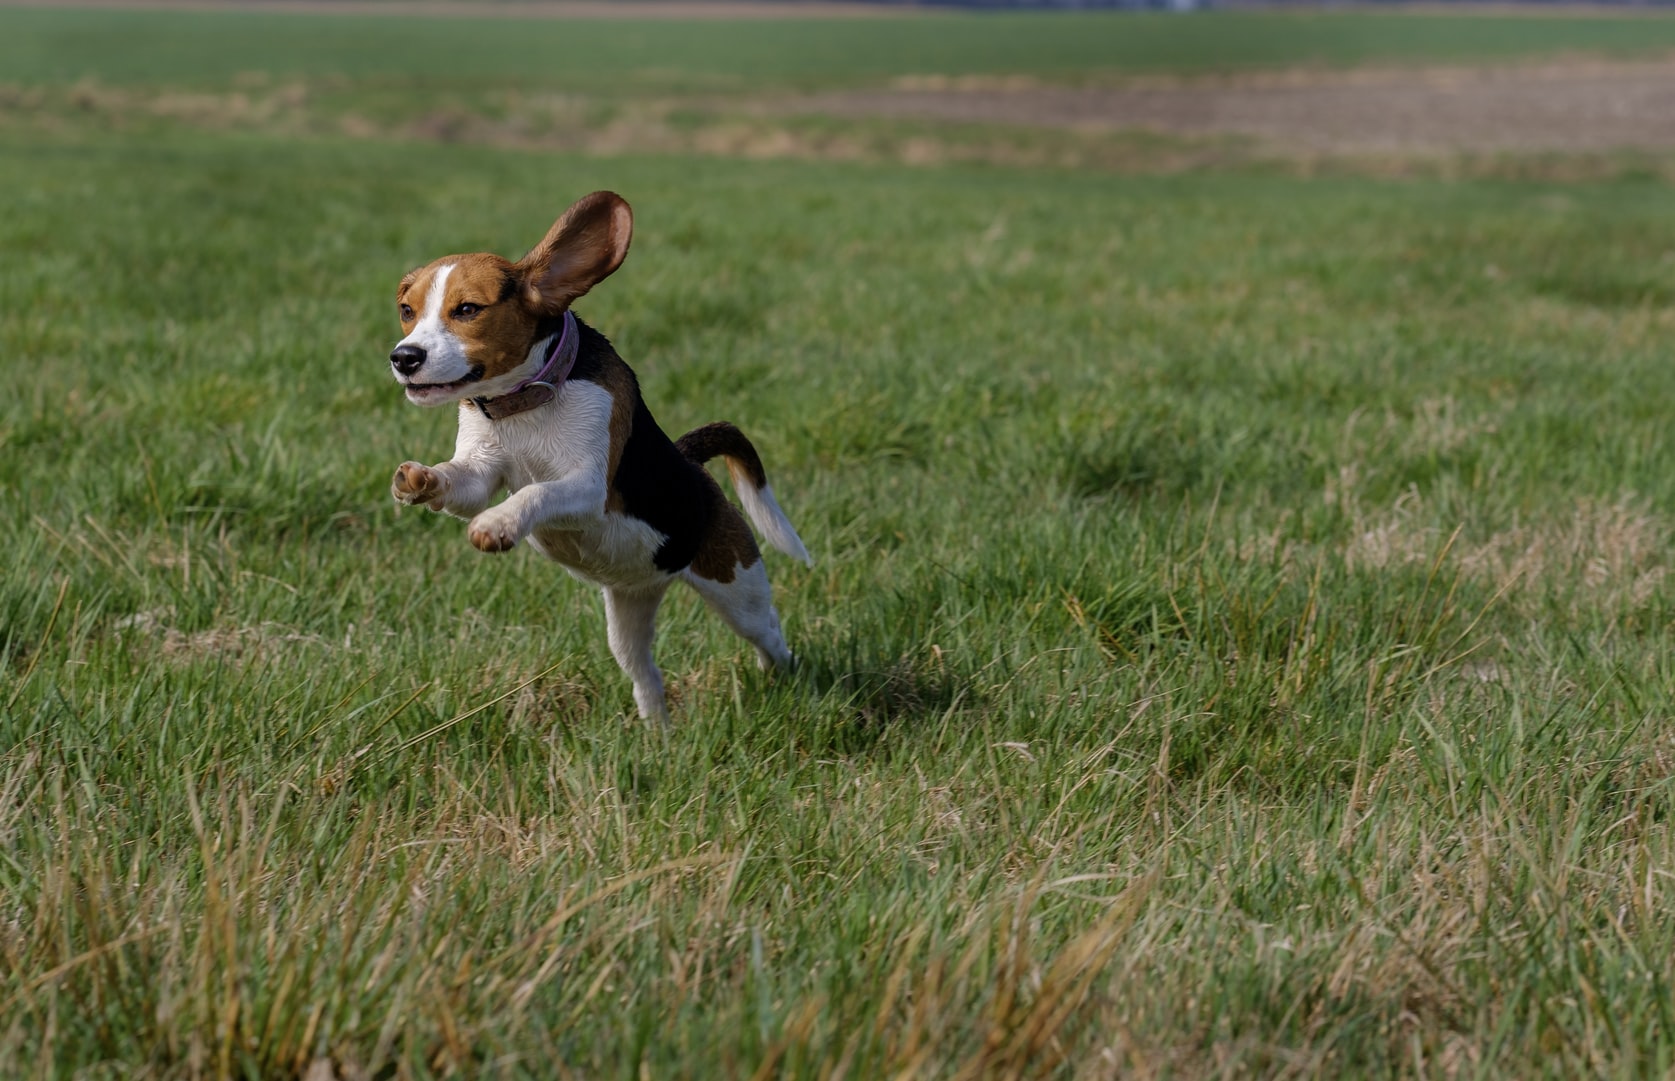 A Beagle running in the field of grass